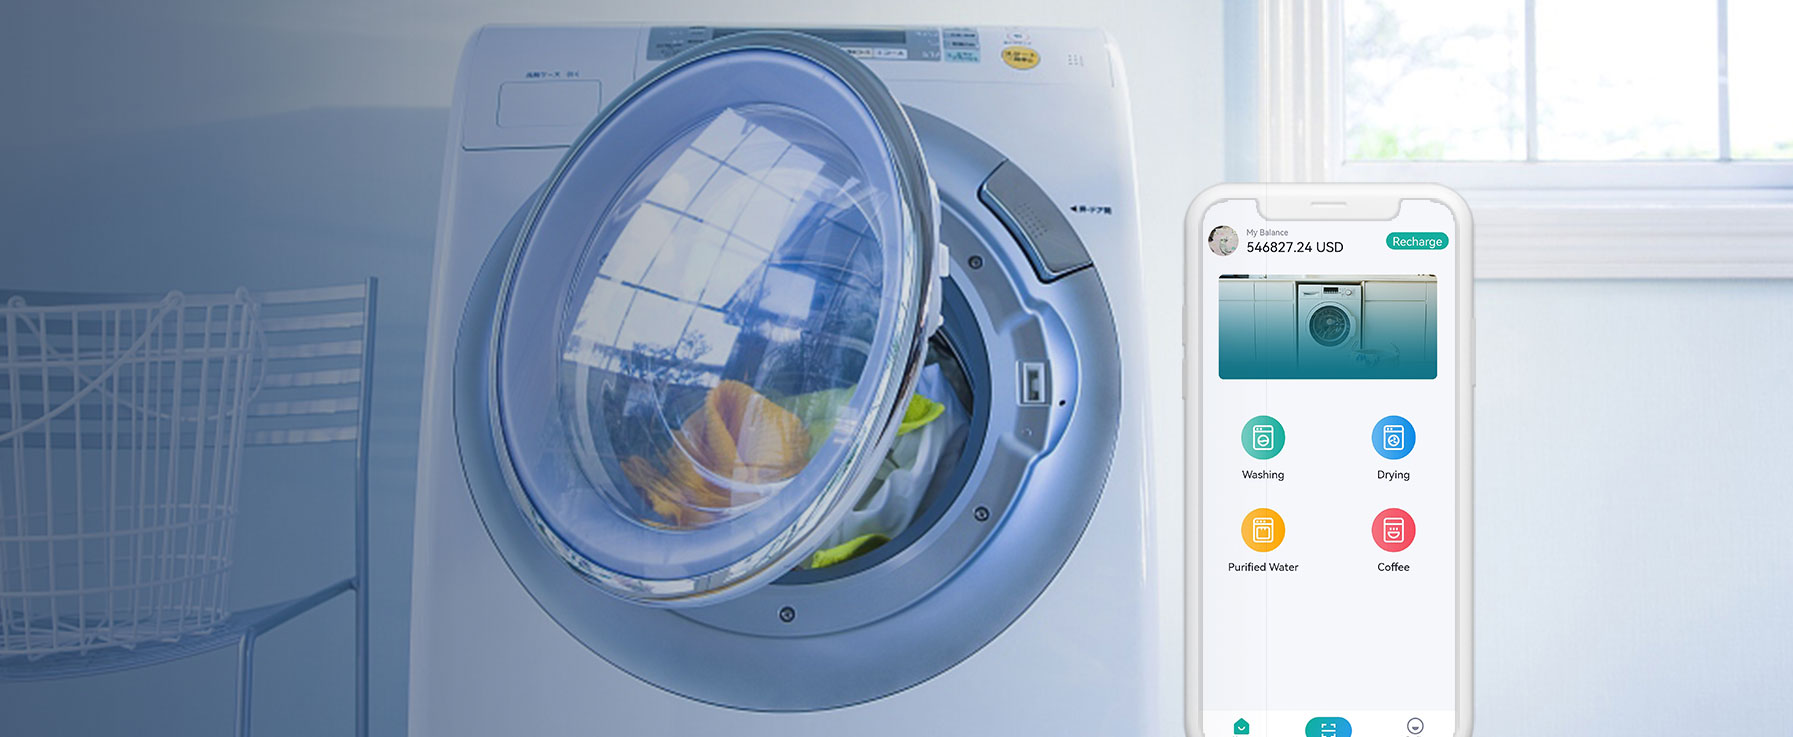 Laundry Payment Solutions